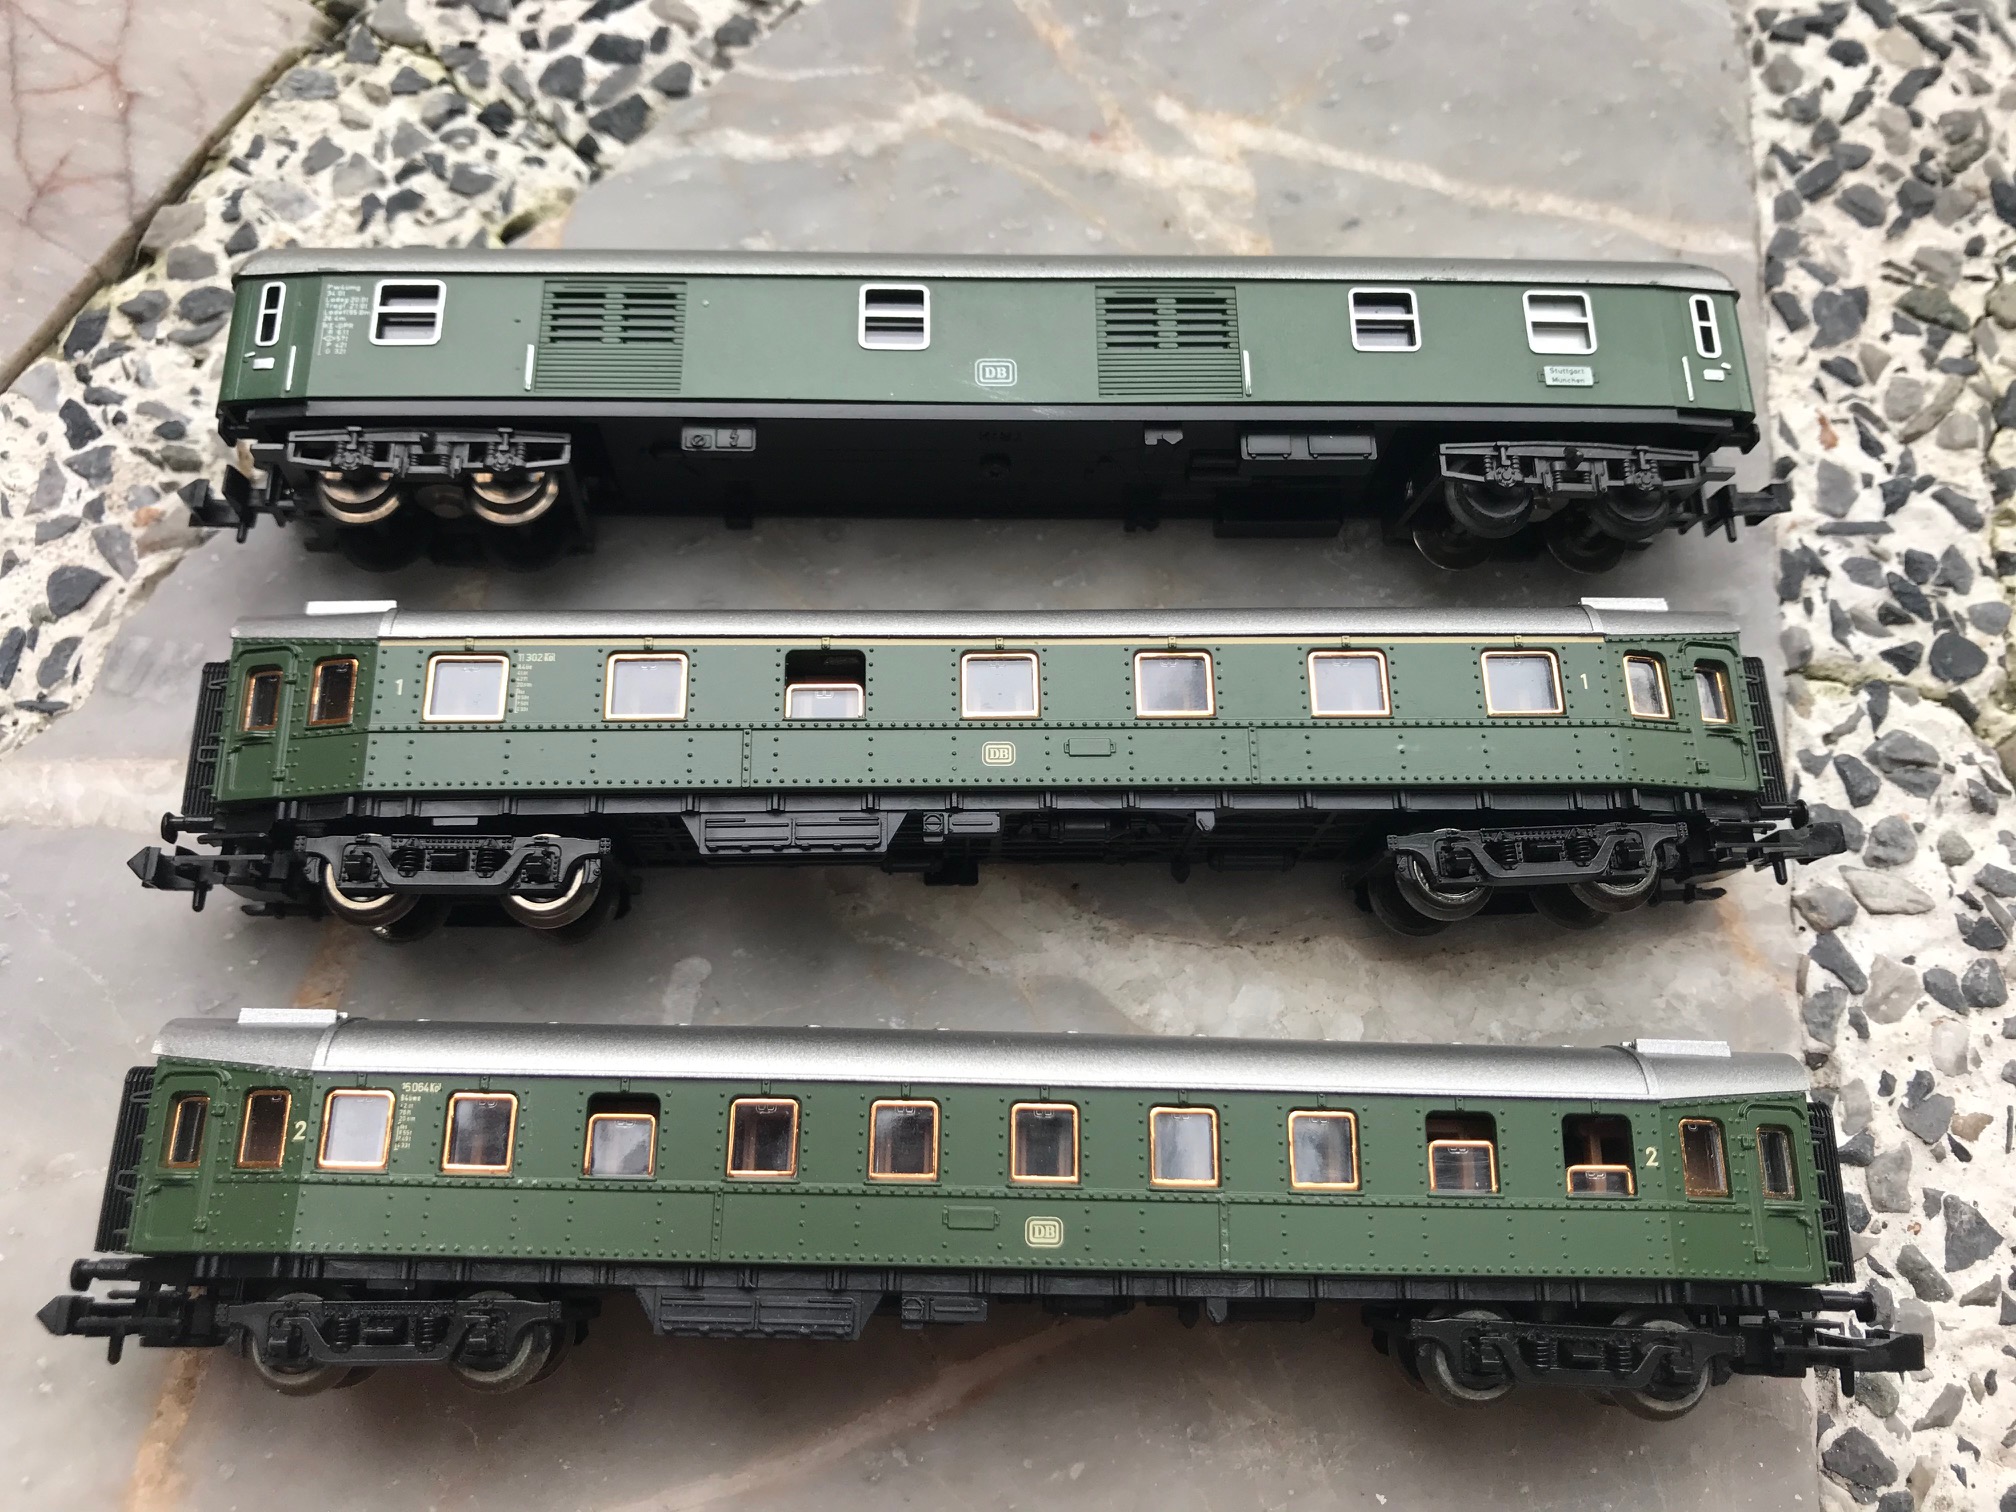 Preowned N Scale Minitrix Trans Europa Express Passenger Cars